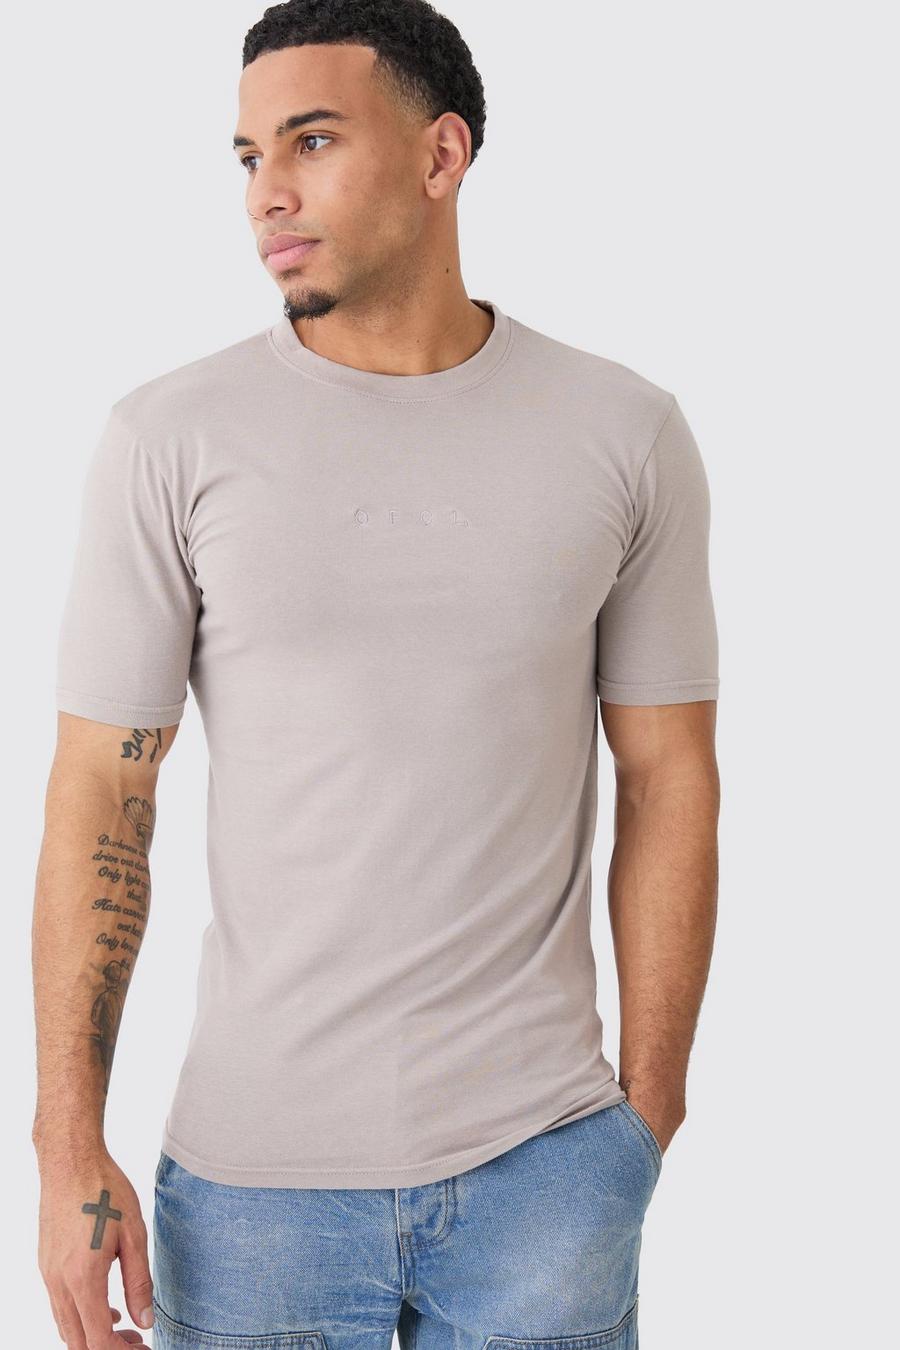 Ofcl Rundhals T-Shirt, Taupe